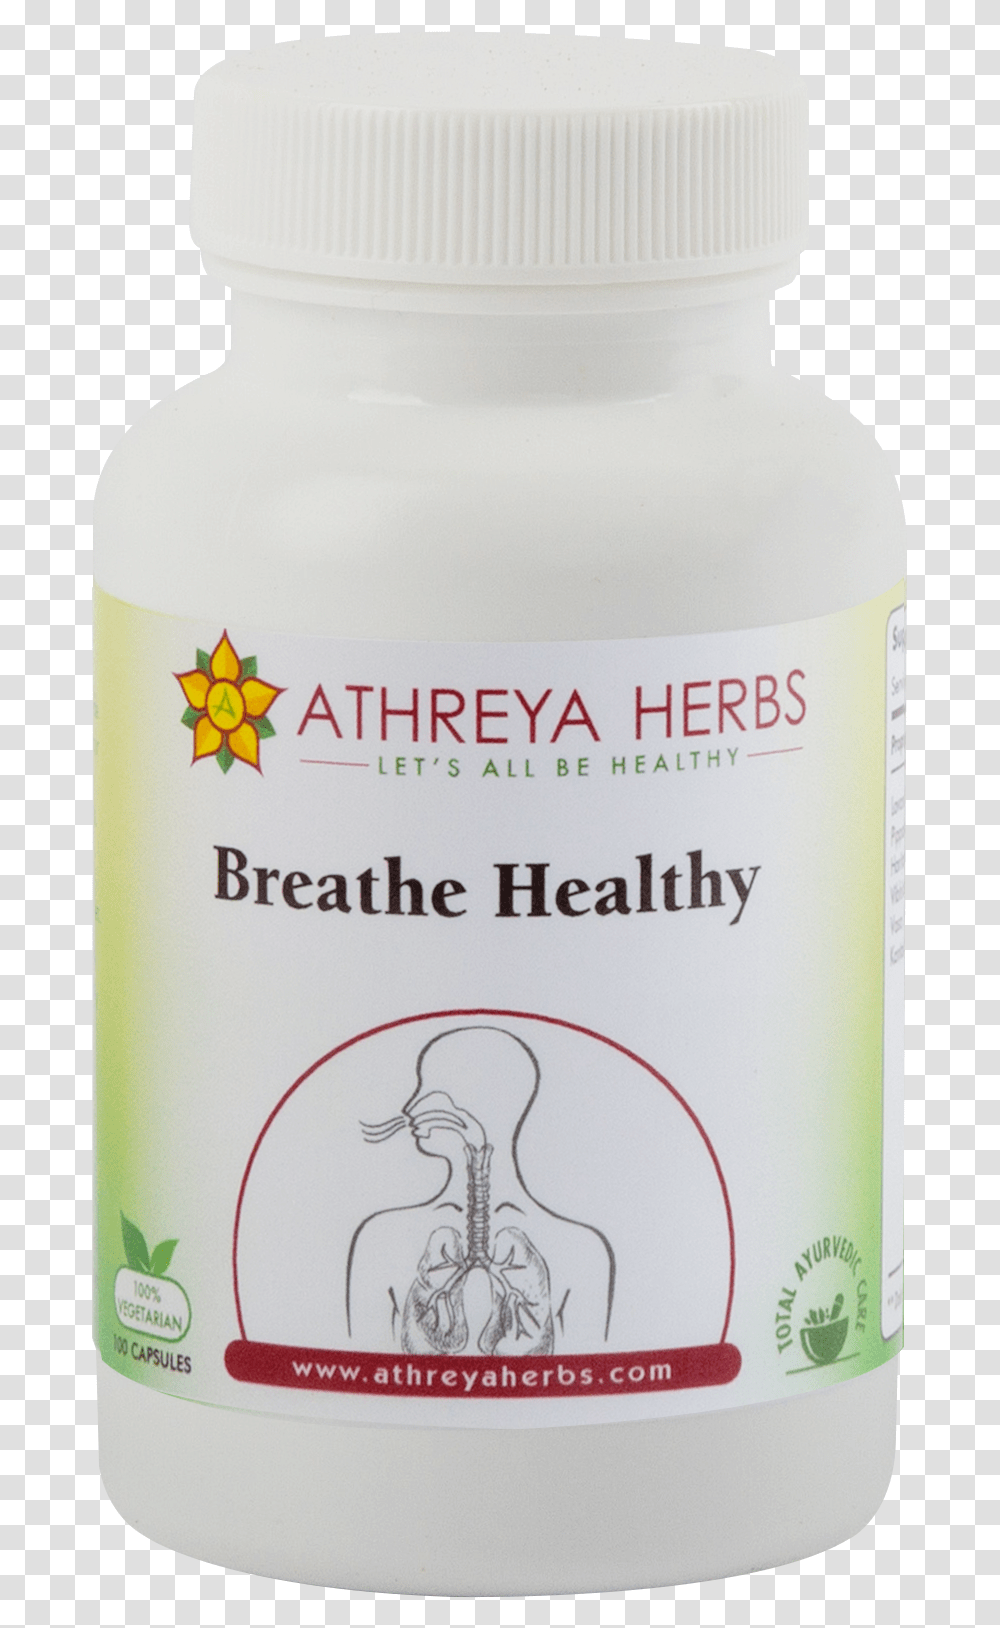 Breathe HealthyClass Lazyload Lazyload Fade In Featured Stallion, Bottle, Milk, Beverage, Cosmetics Transparent Png